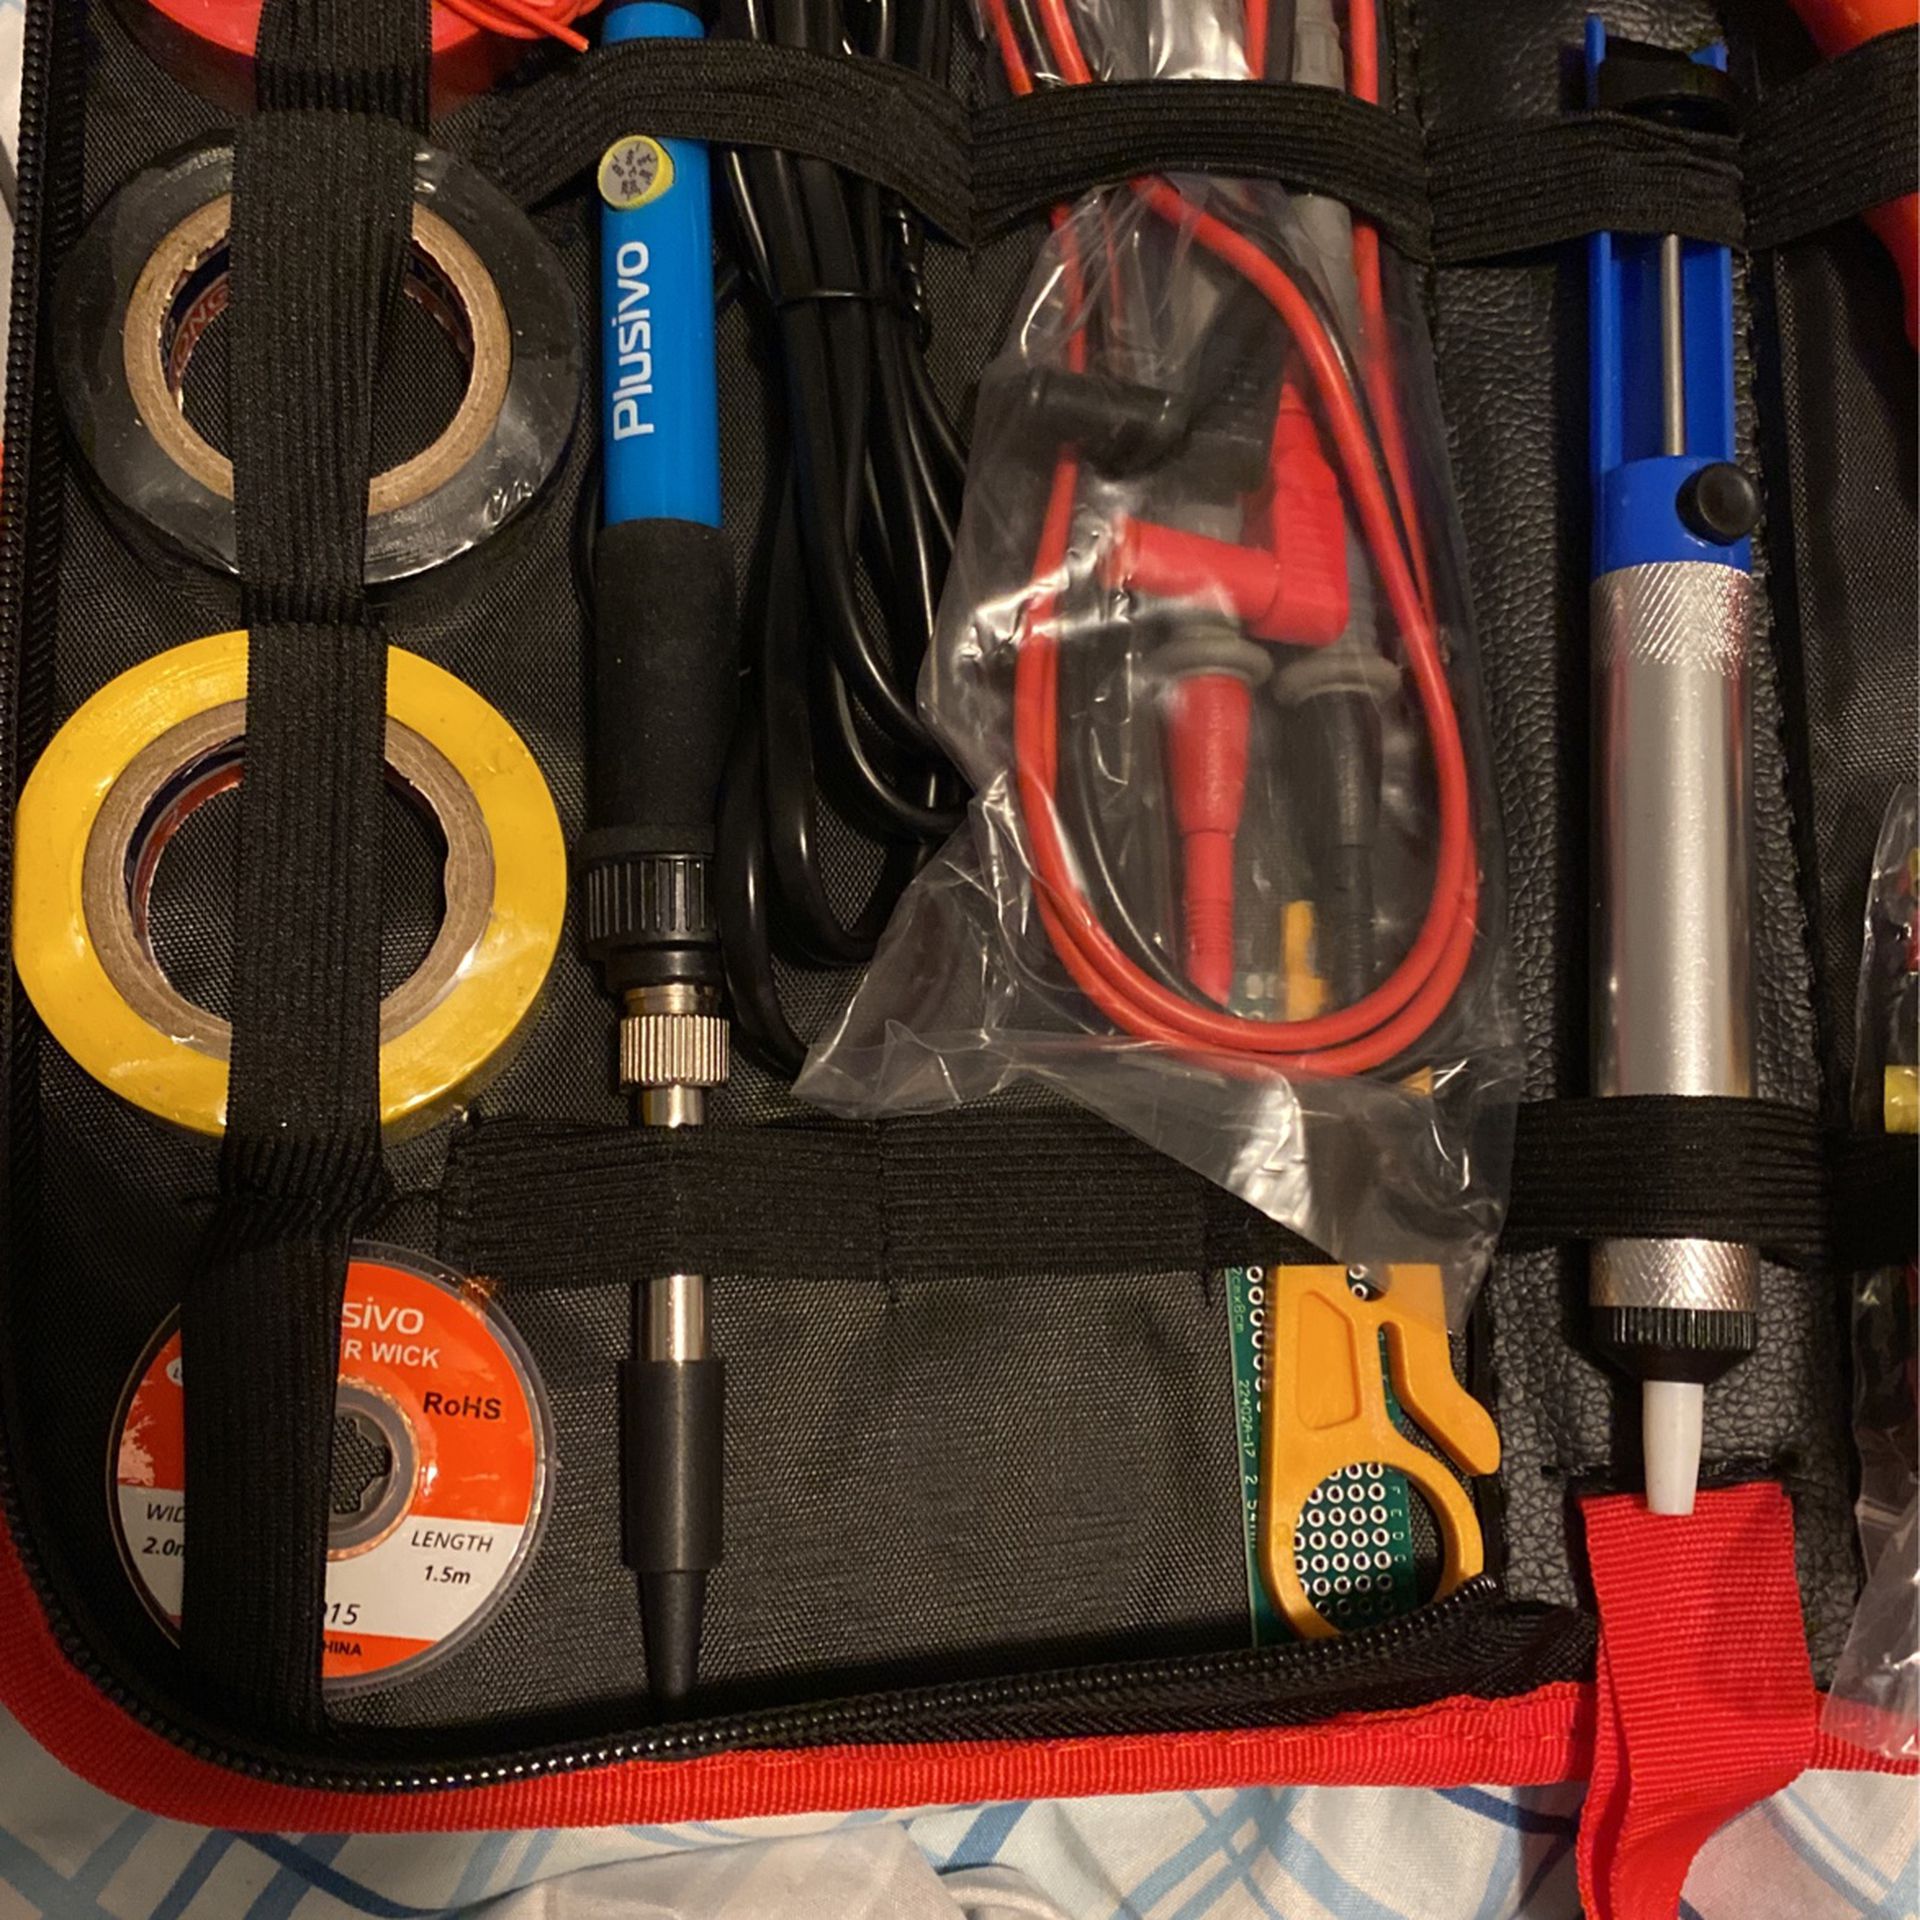 Carrying Case With Tools